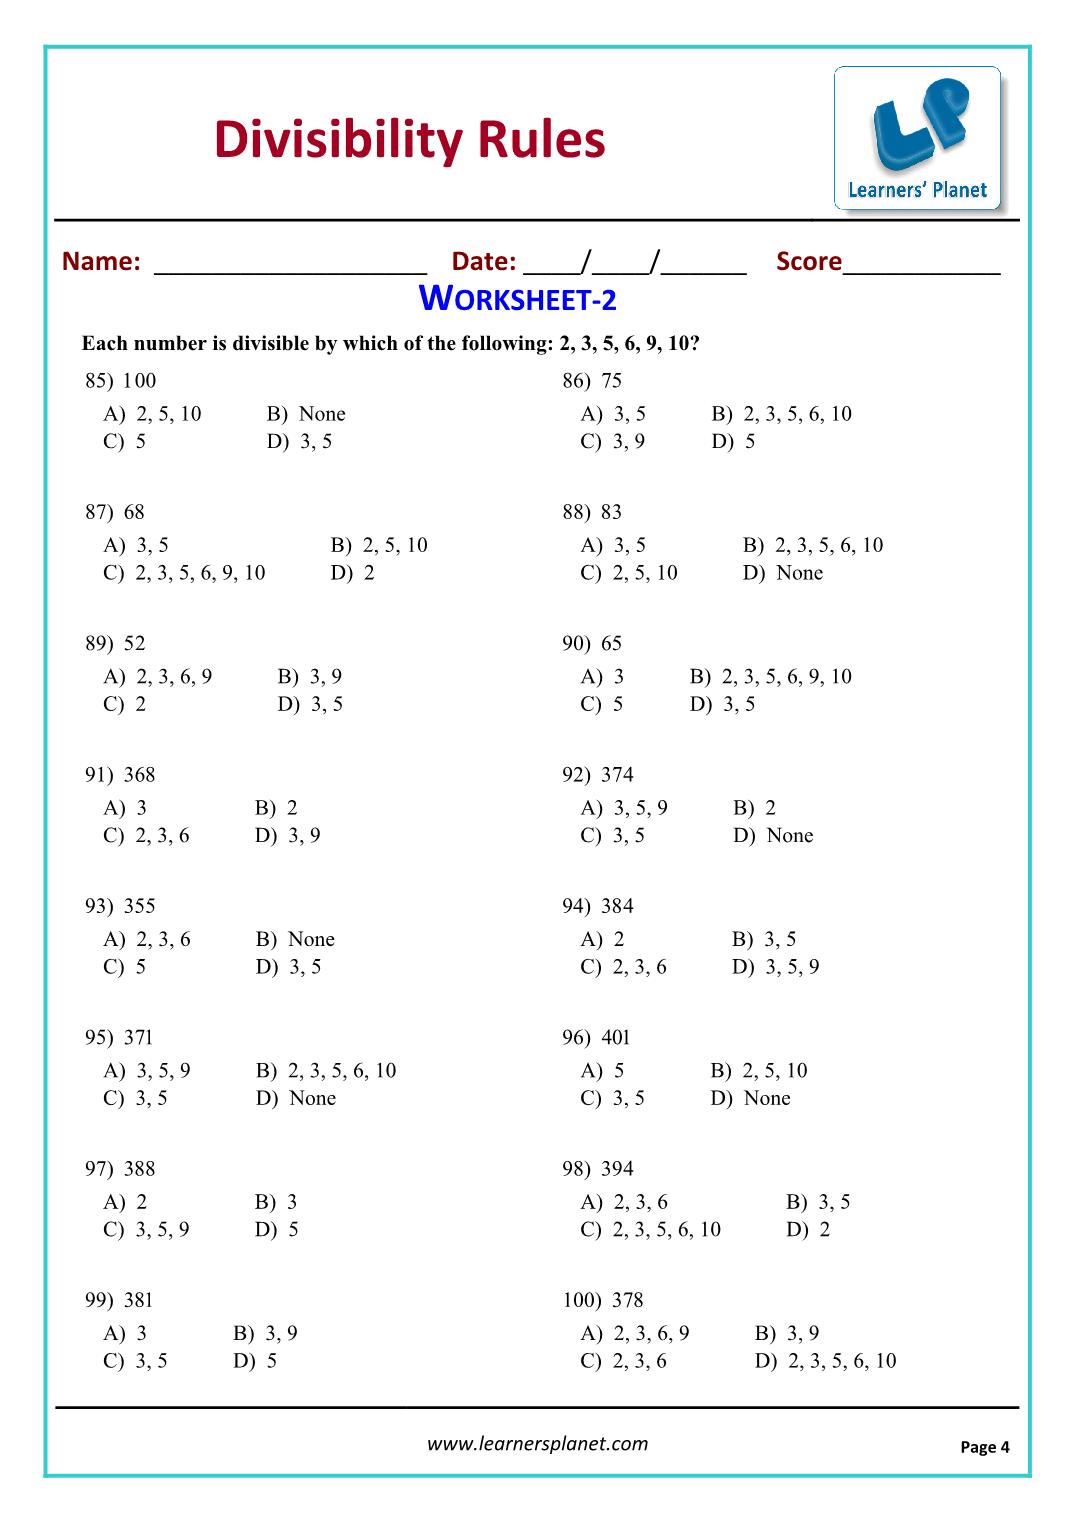  Factors And Multiples Worksheet For Class 5 Cbse Roger Brent s 5th Grade Math Worksheets